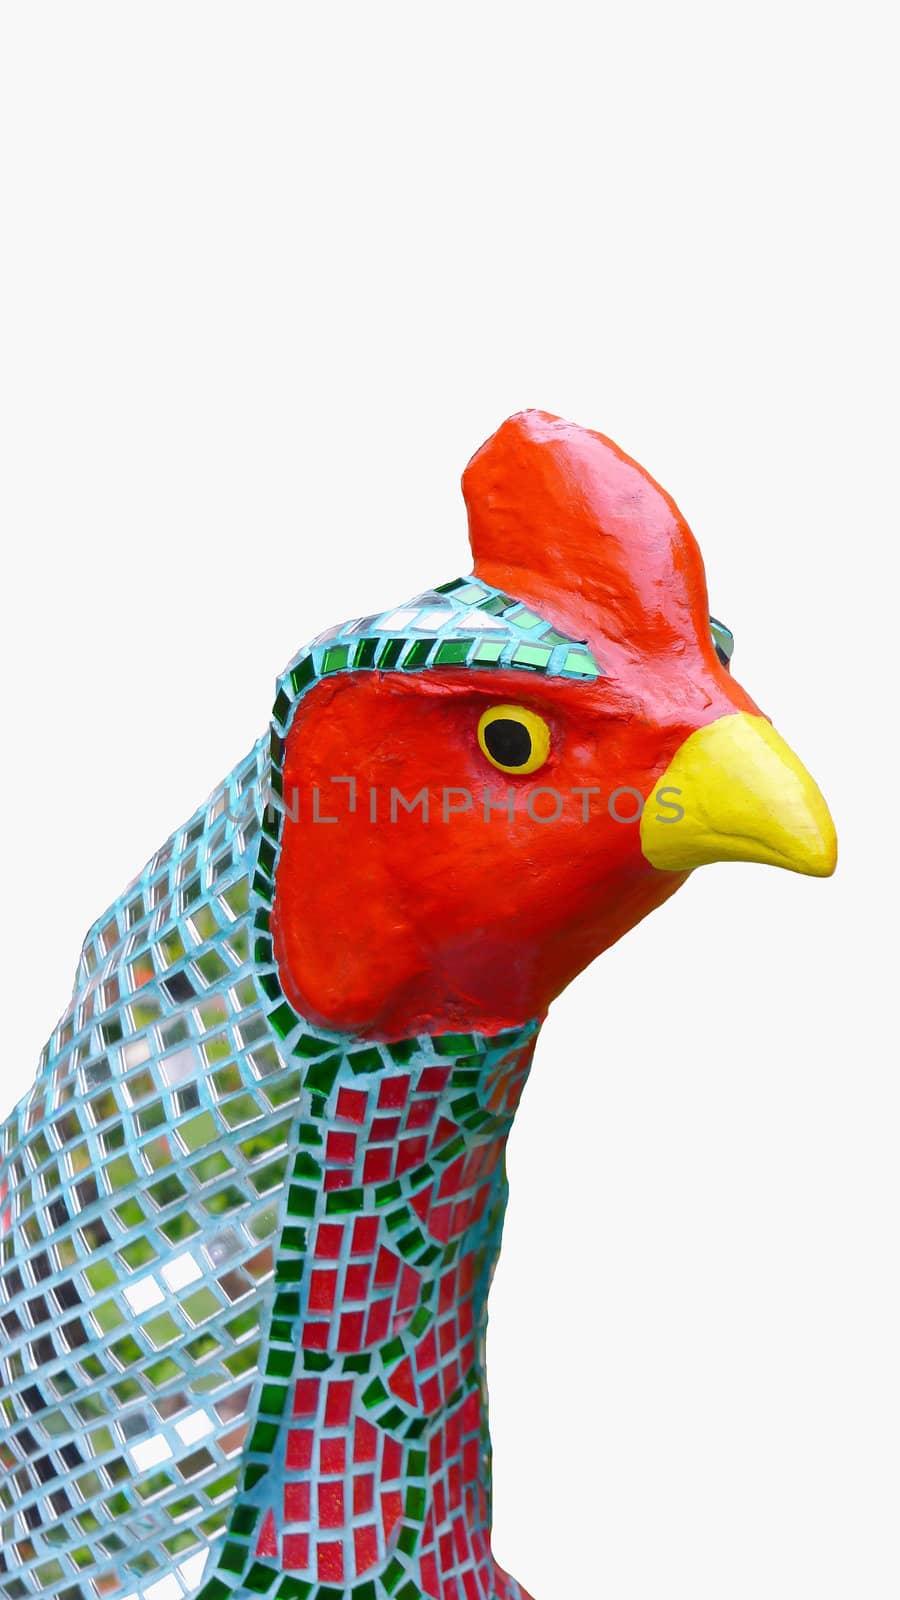 Chicken statue decorated with colorful mirror isolated on white background 